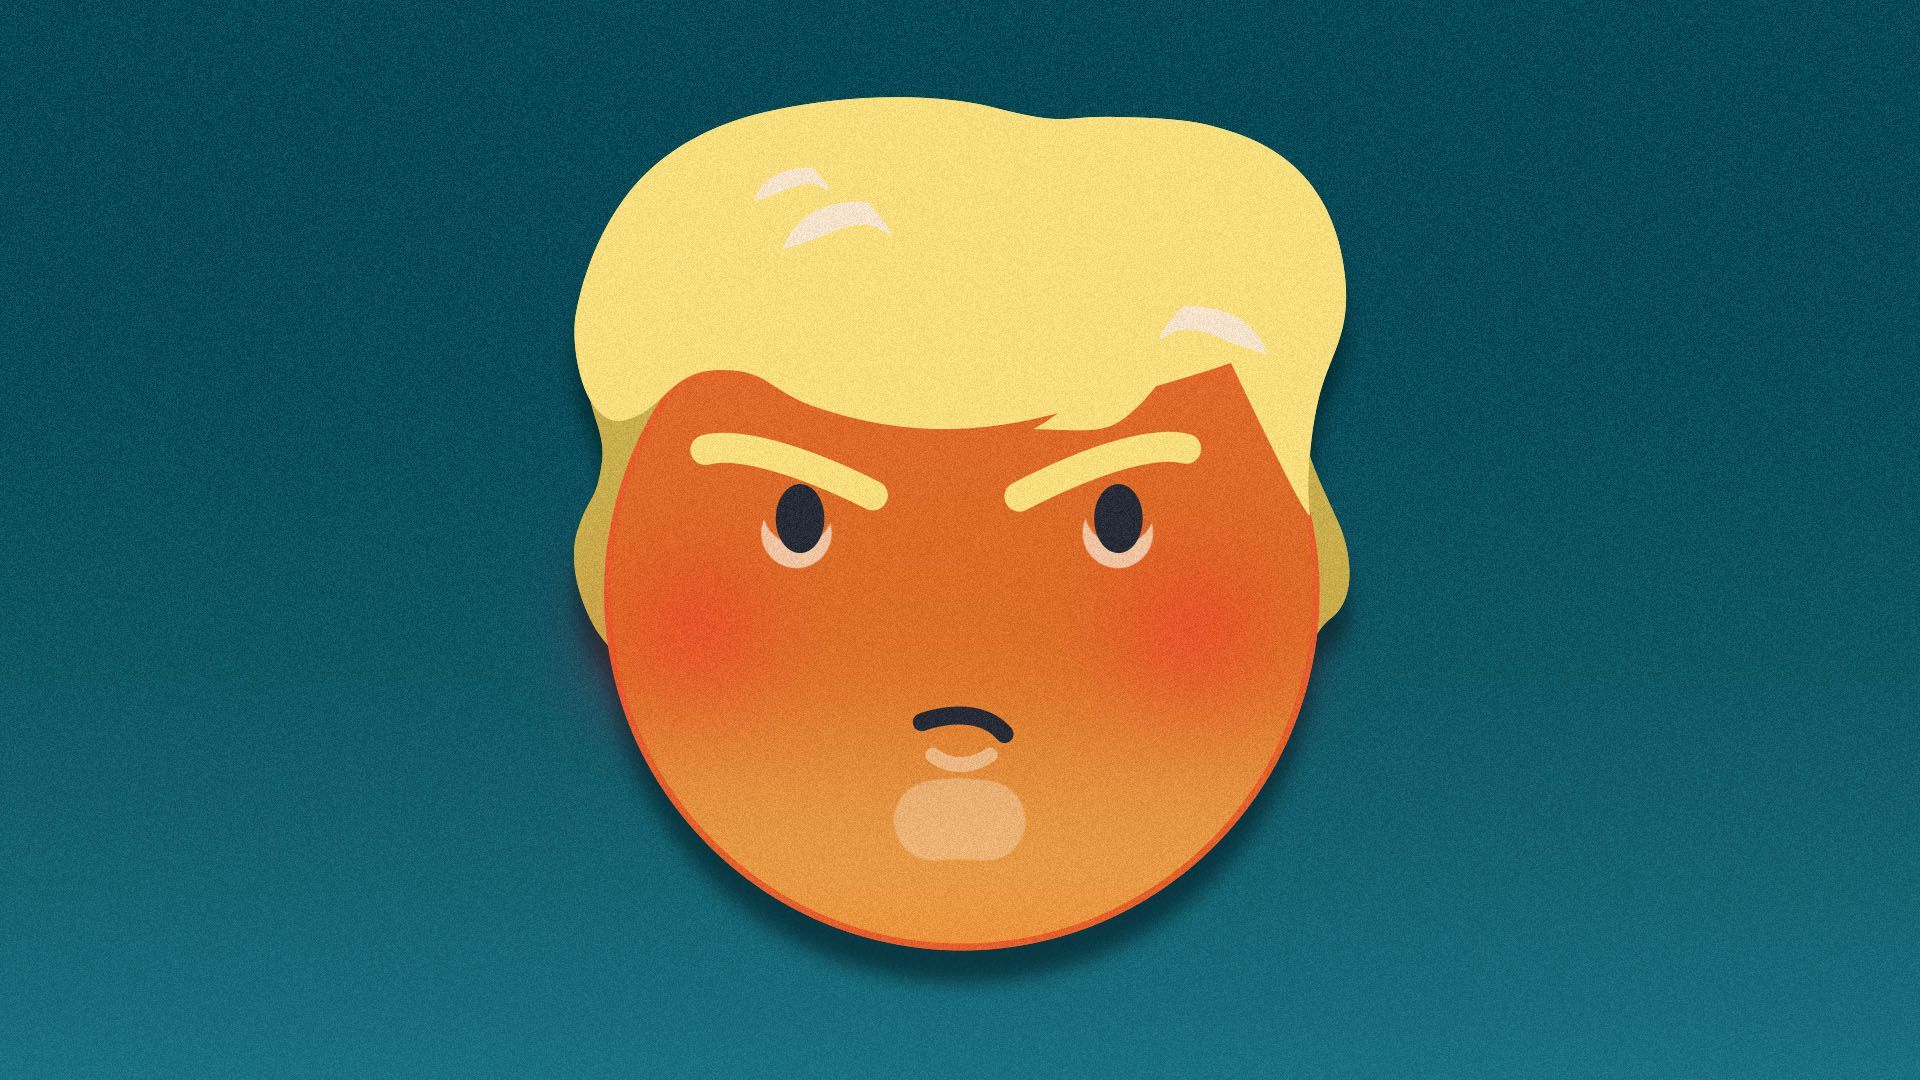 Illustration of an angry facebook emoji that resembles Donald Trump